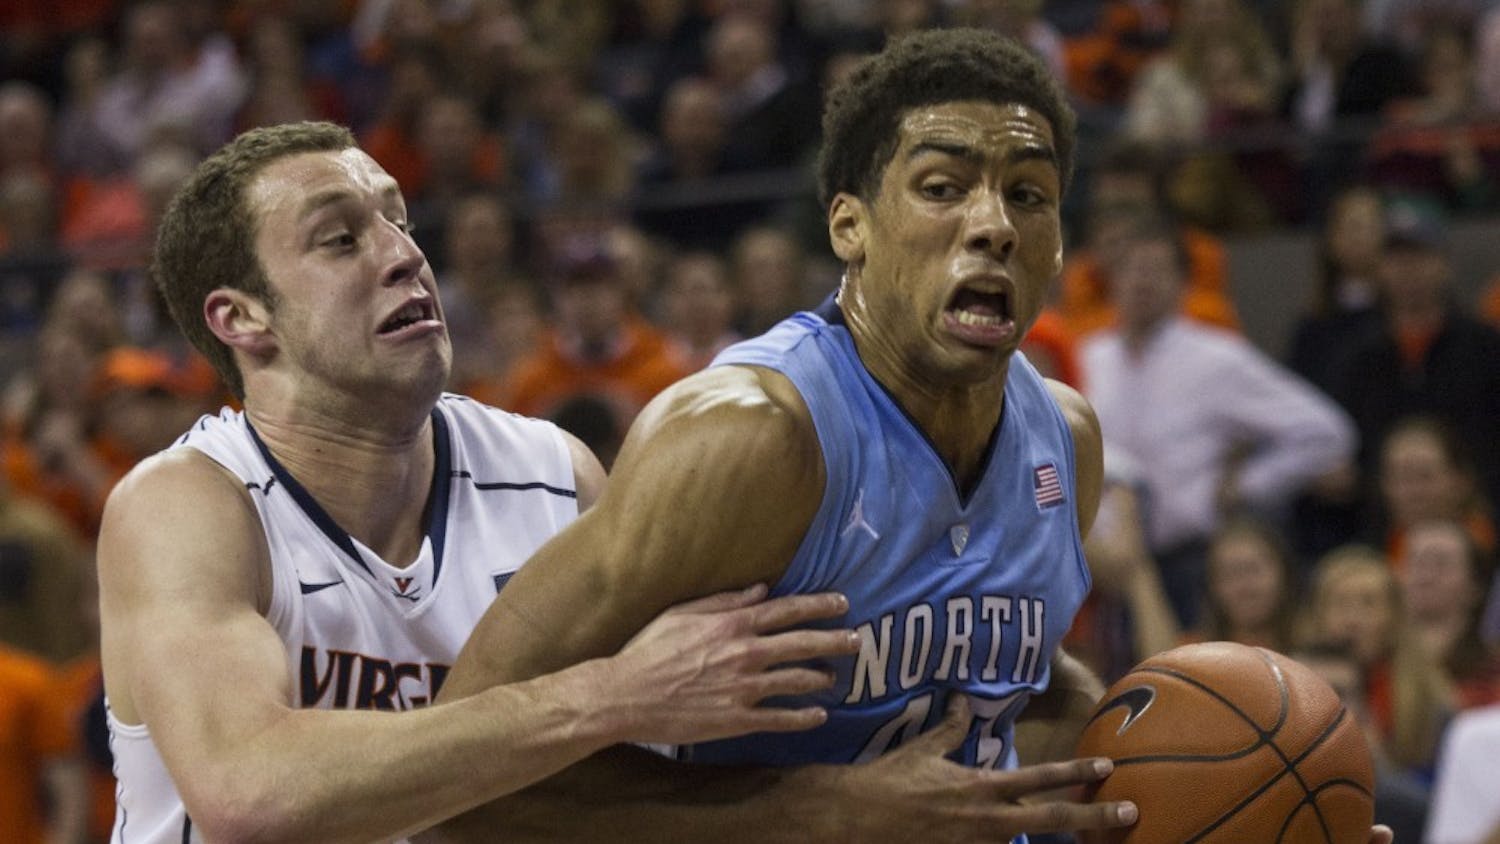 James Michael McAdoo struggles to maintain control of the ball as Evan Nolte guards.